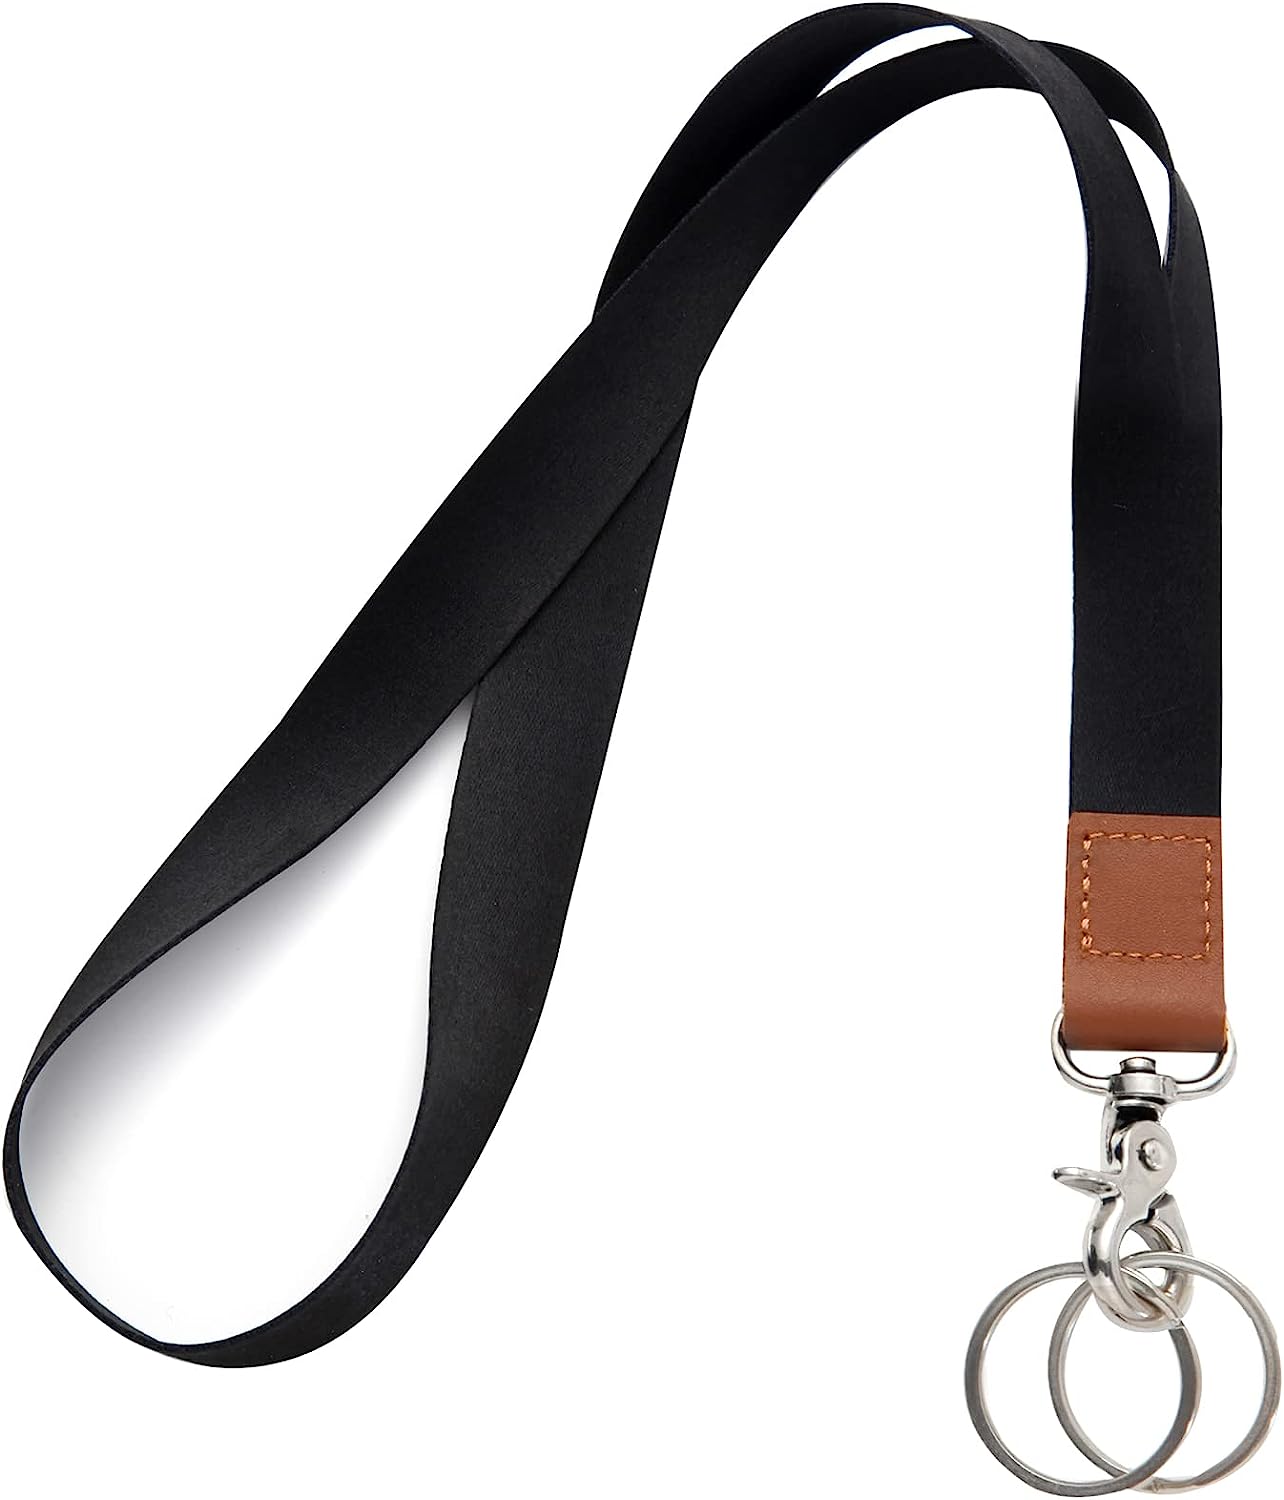 lanyards for keys detailed review